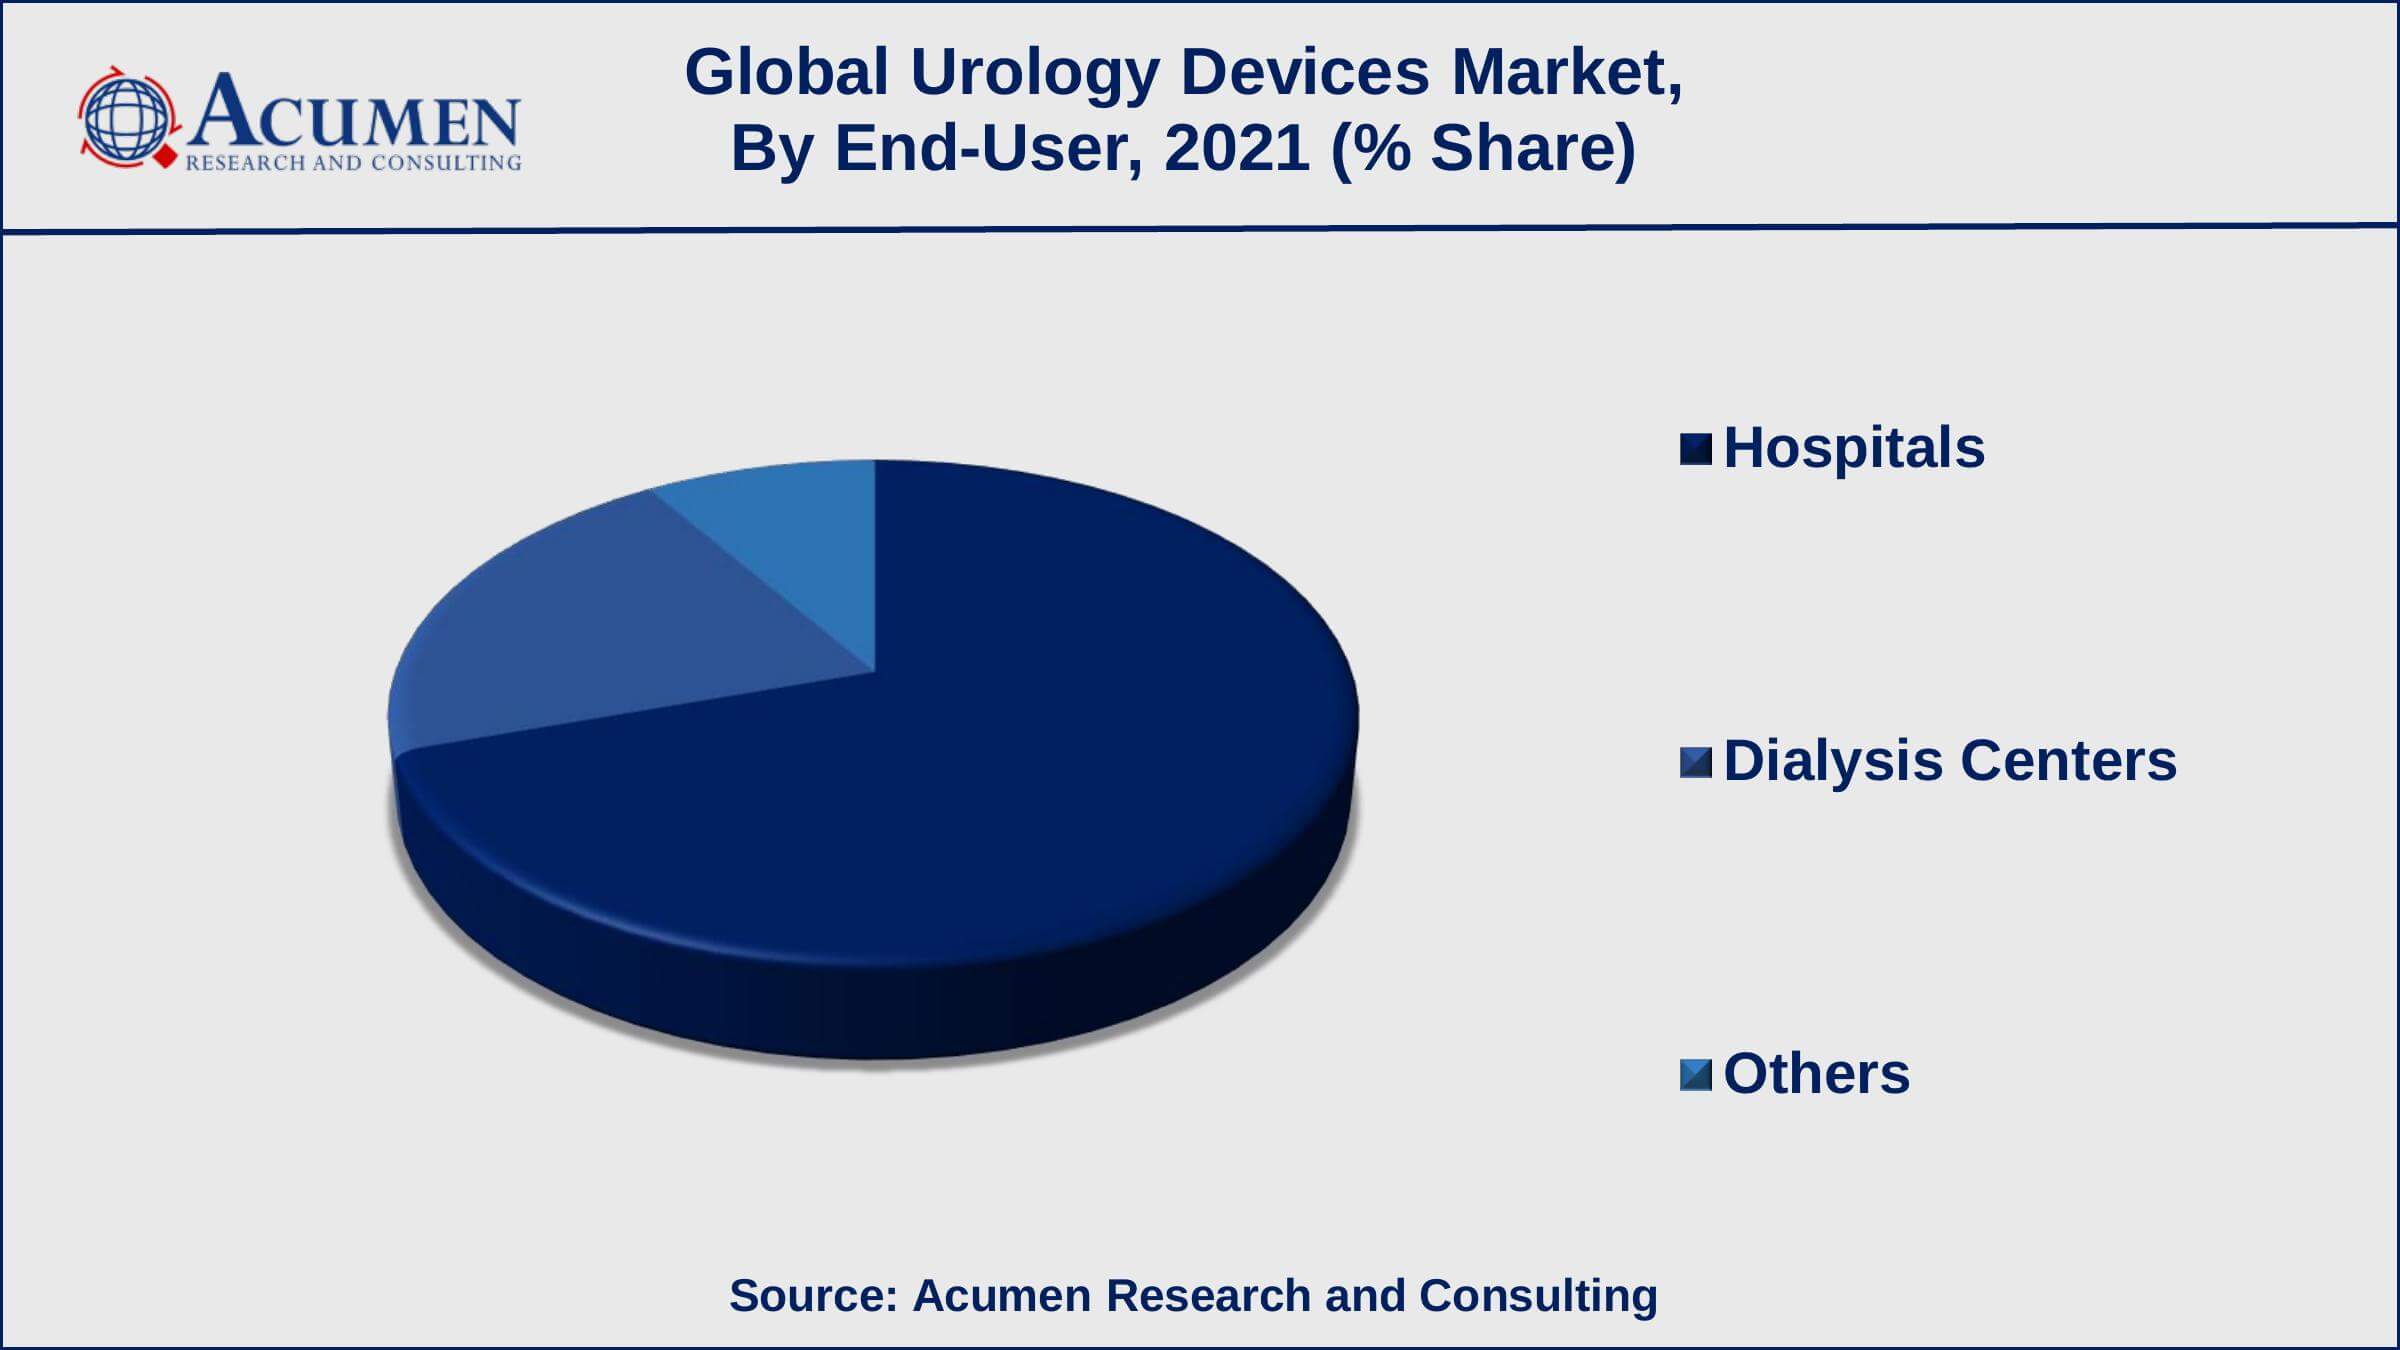 Among end-user, hospitals generated shares of over 70% in 2021 Increasing adoption of single-use cystoscopes is a popular urology devices market trend that fuels the industry demand